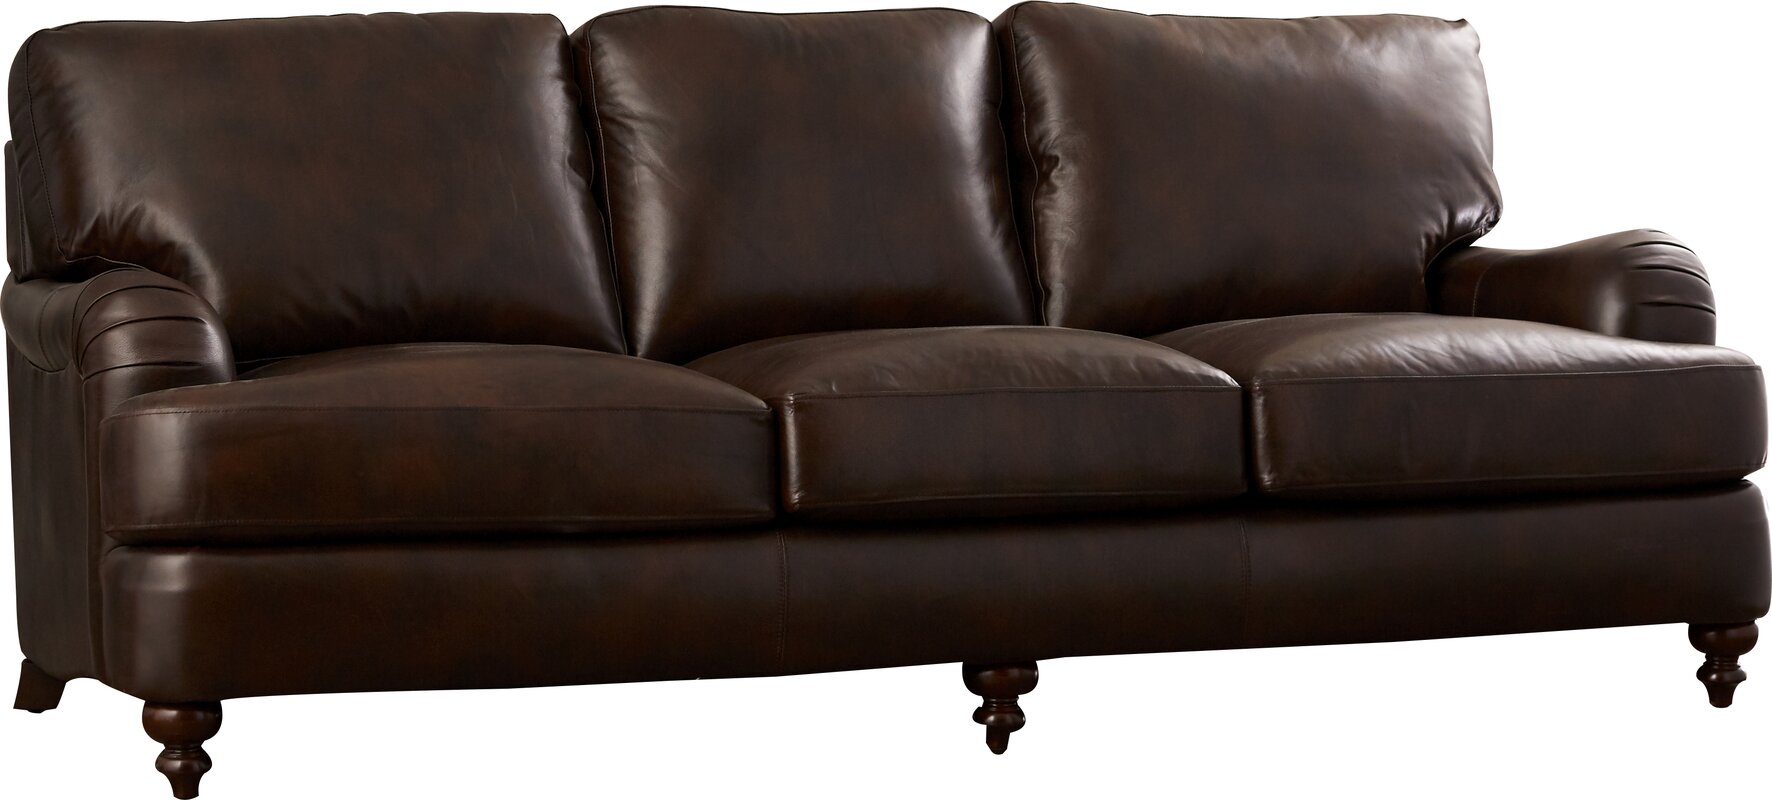 darby home co leather sofa